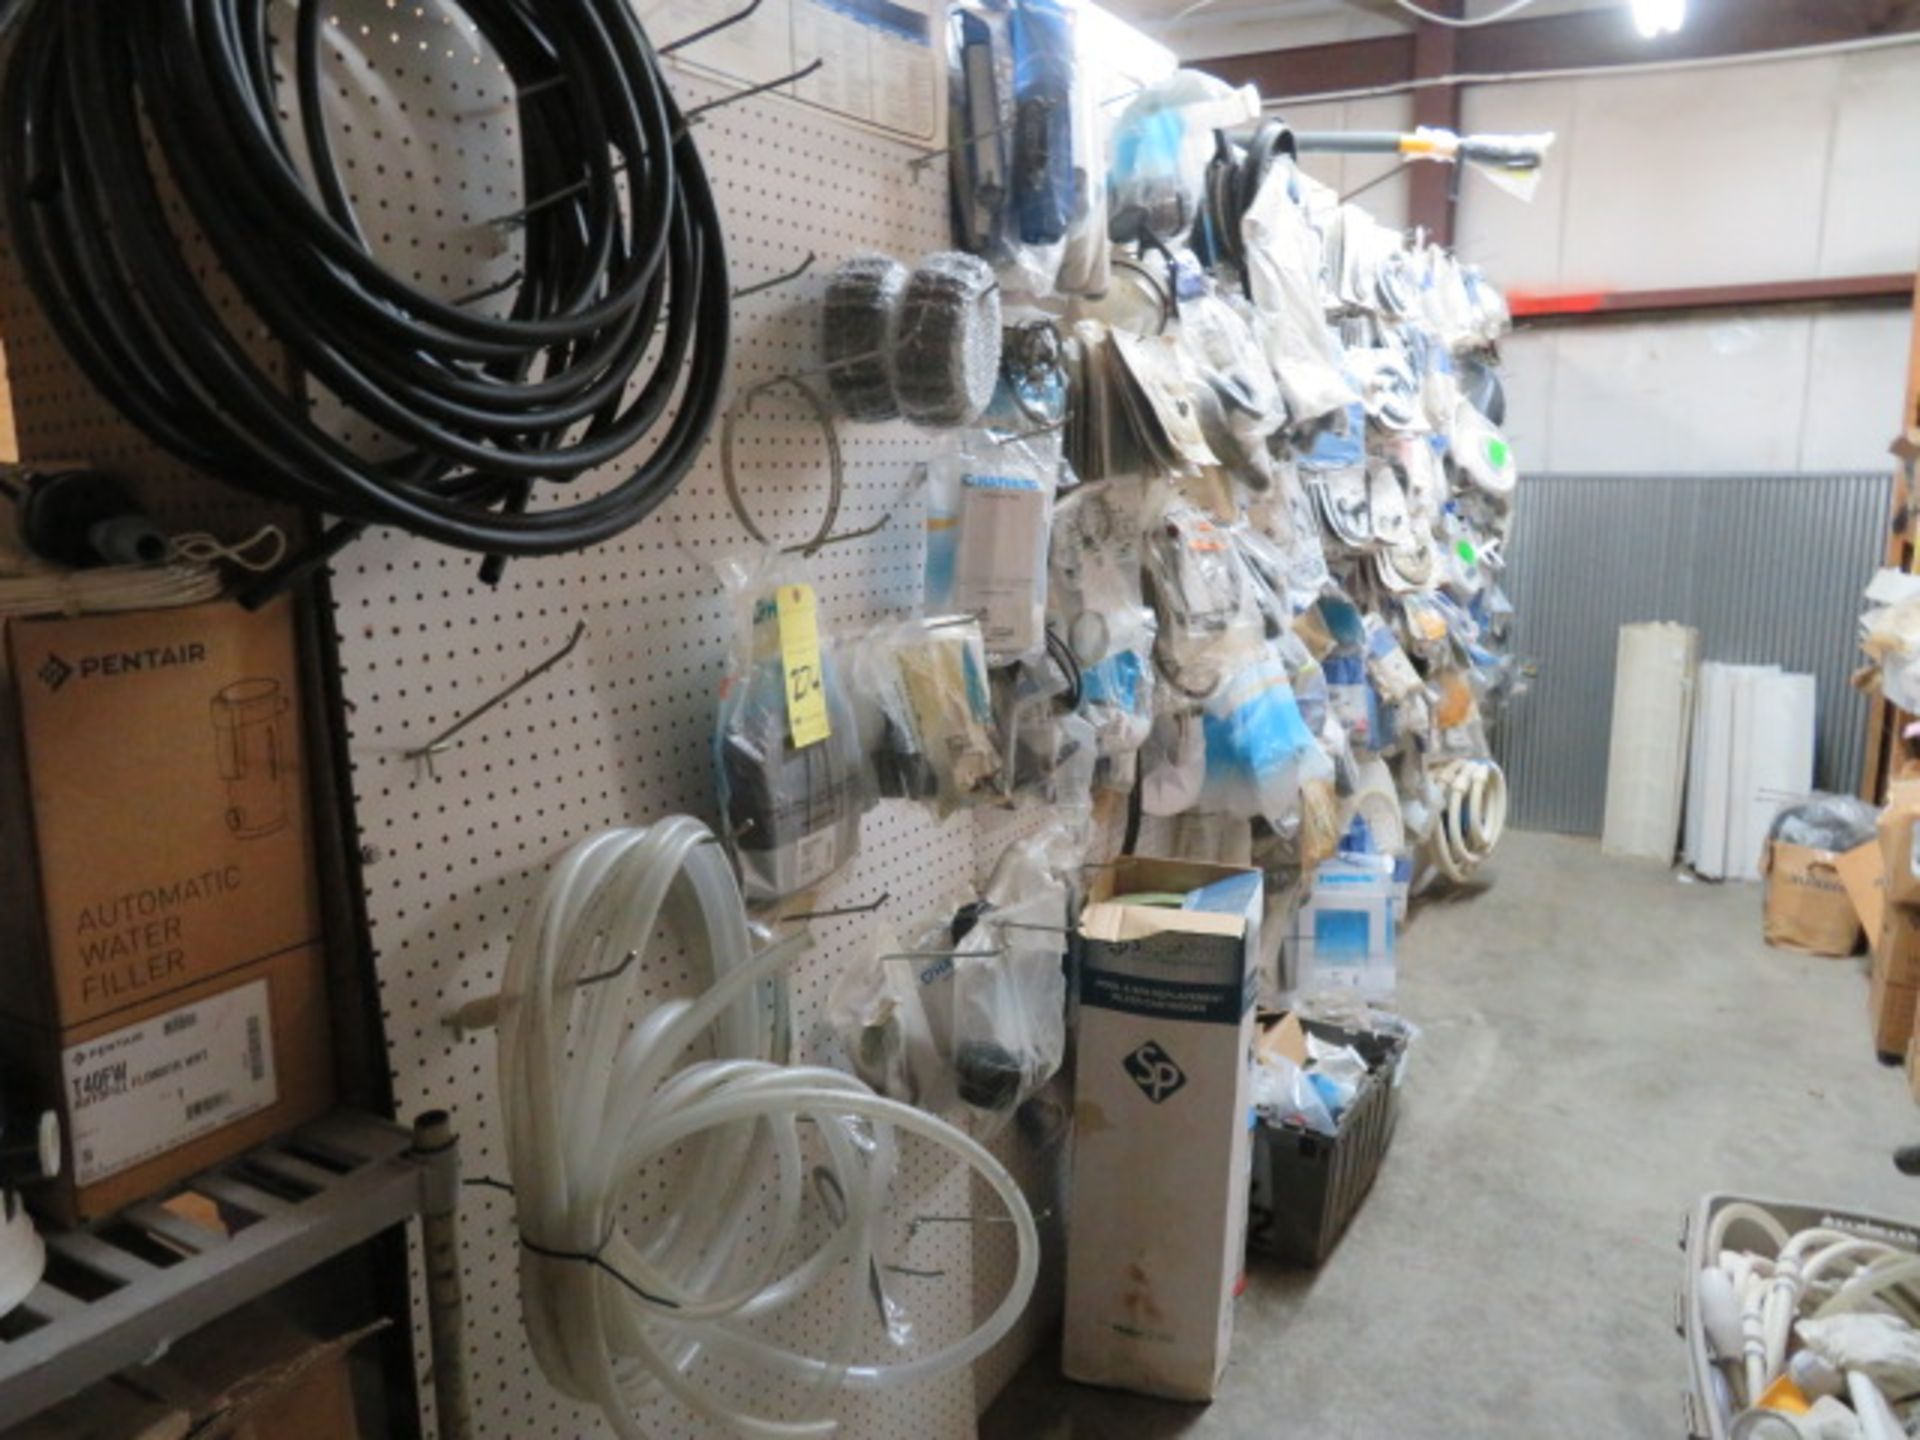 LOT CONSISTING OF: pool sweep, filter parts, pump parts, table chlorinator parts, assorted